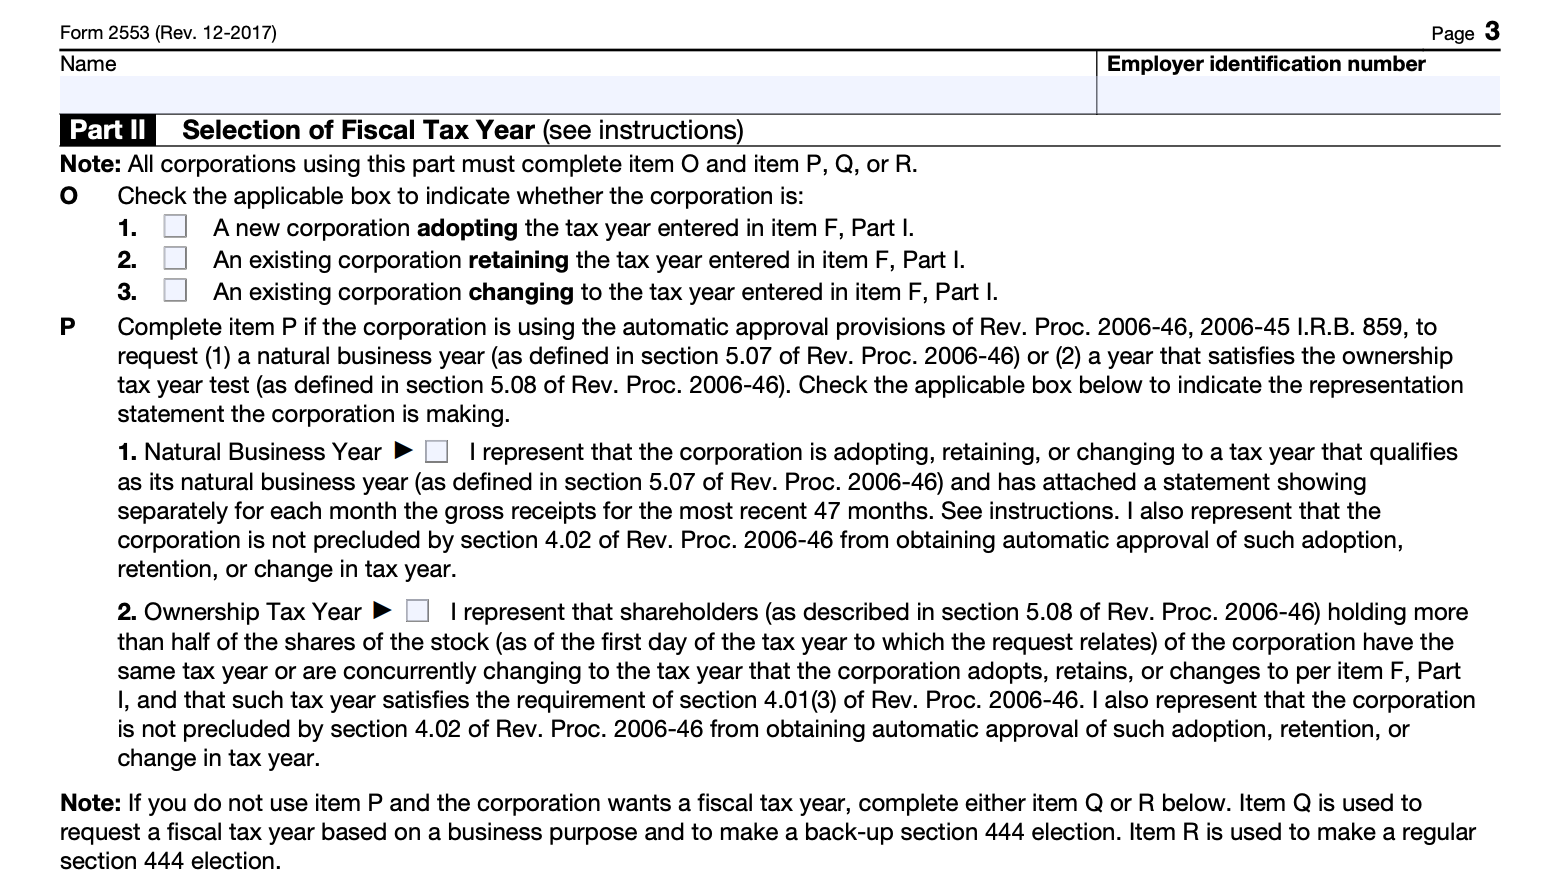 irs form 2553 part 2.png